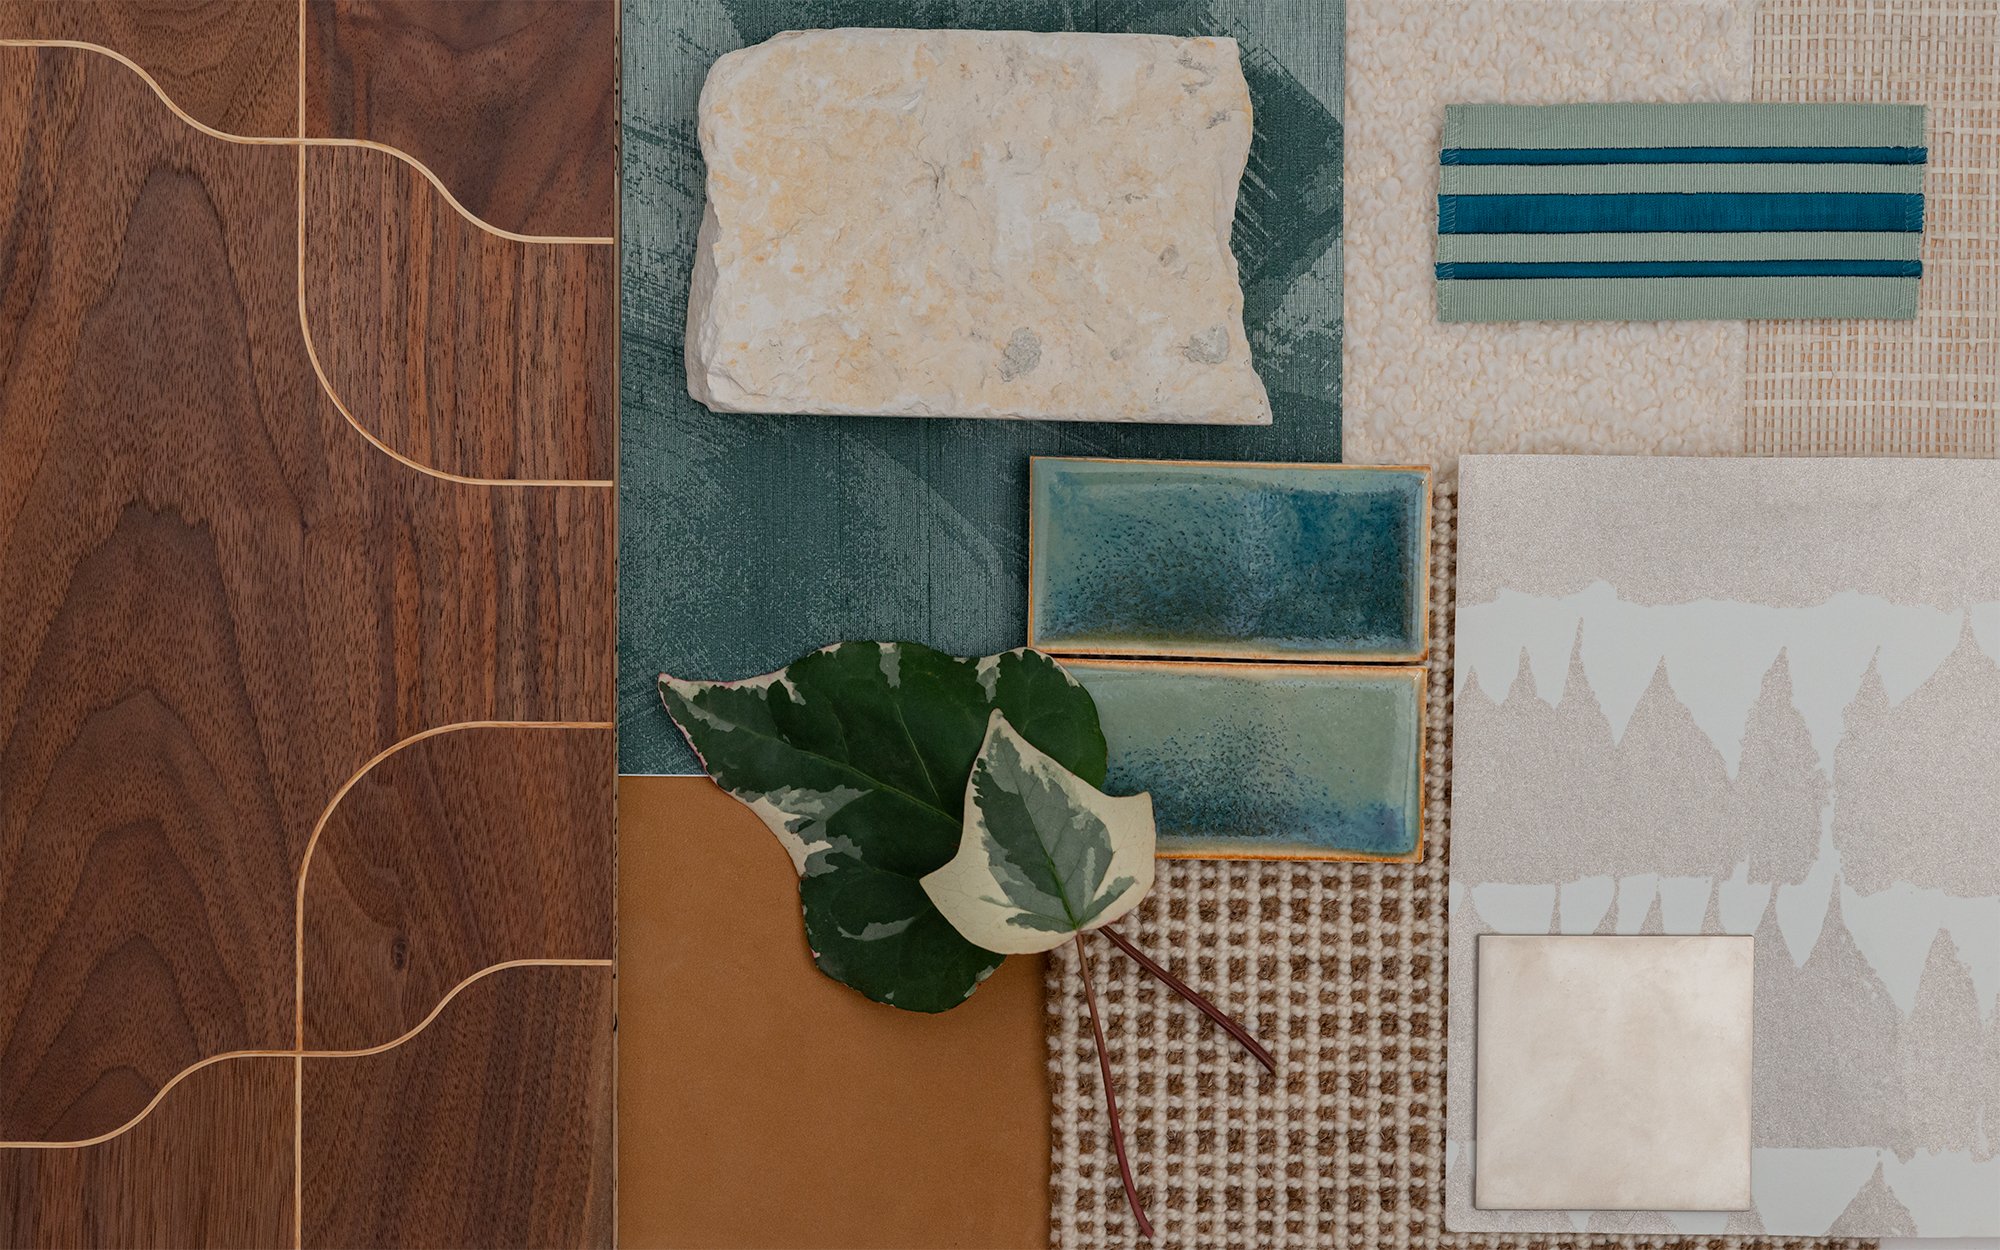 Material selection for each project is a unique and creative process. This warm springtime color palette of green, blue and walnut speaks to the season by combining natural stone, wool, ceramic, and leather. #interiordesign #napavalley #furniture #wi